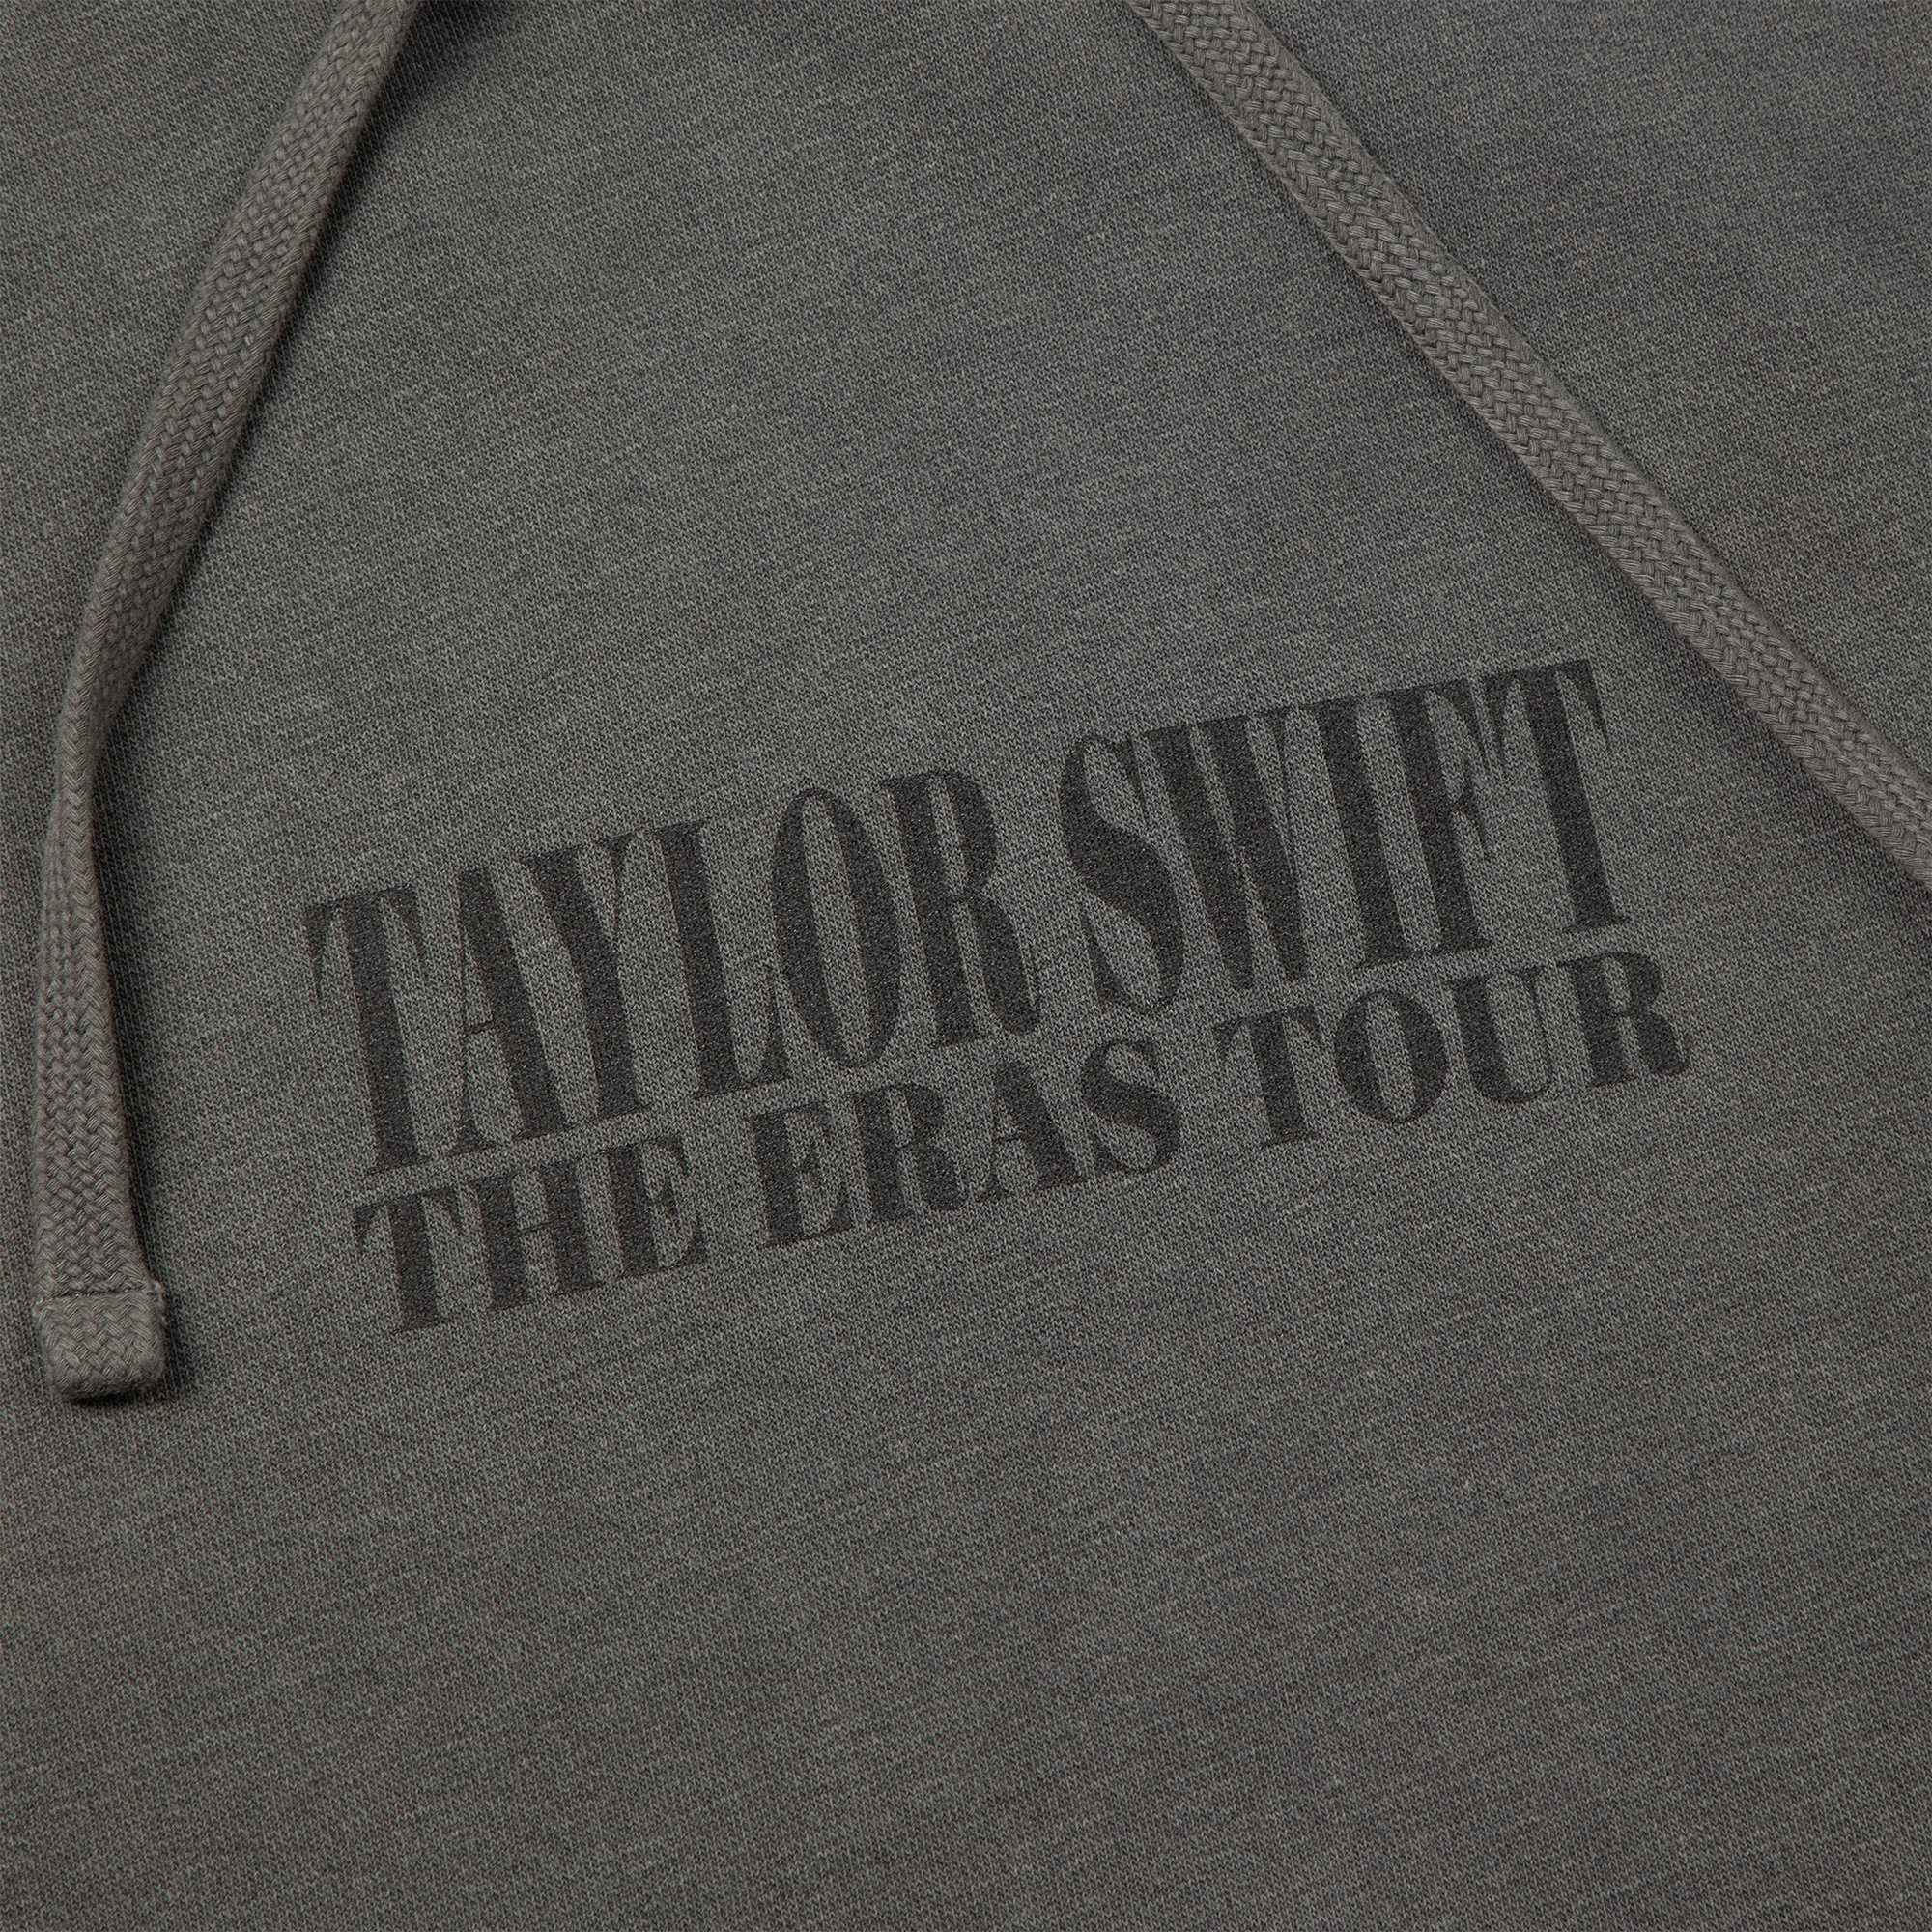 Taylor Swift - Taylor Swift The Eras Tour Charcoal Hoodie